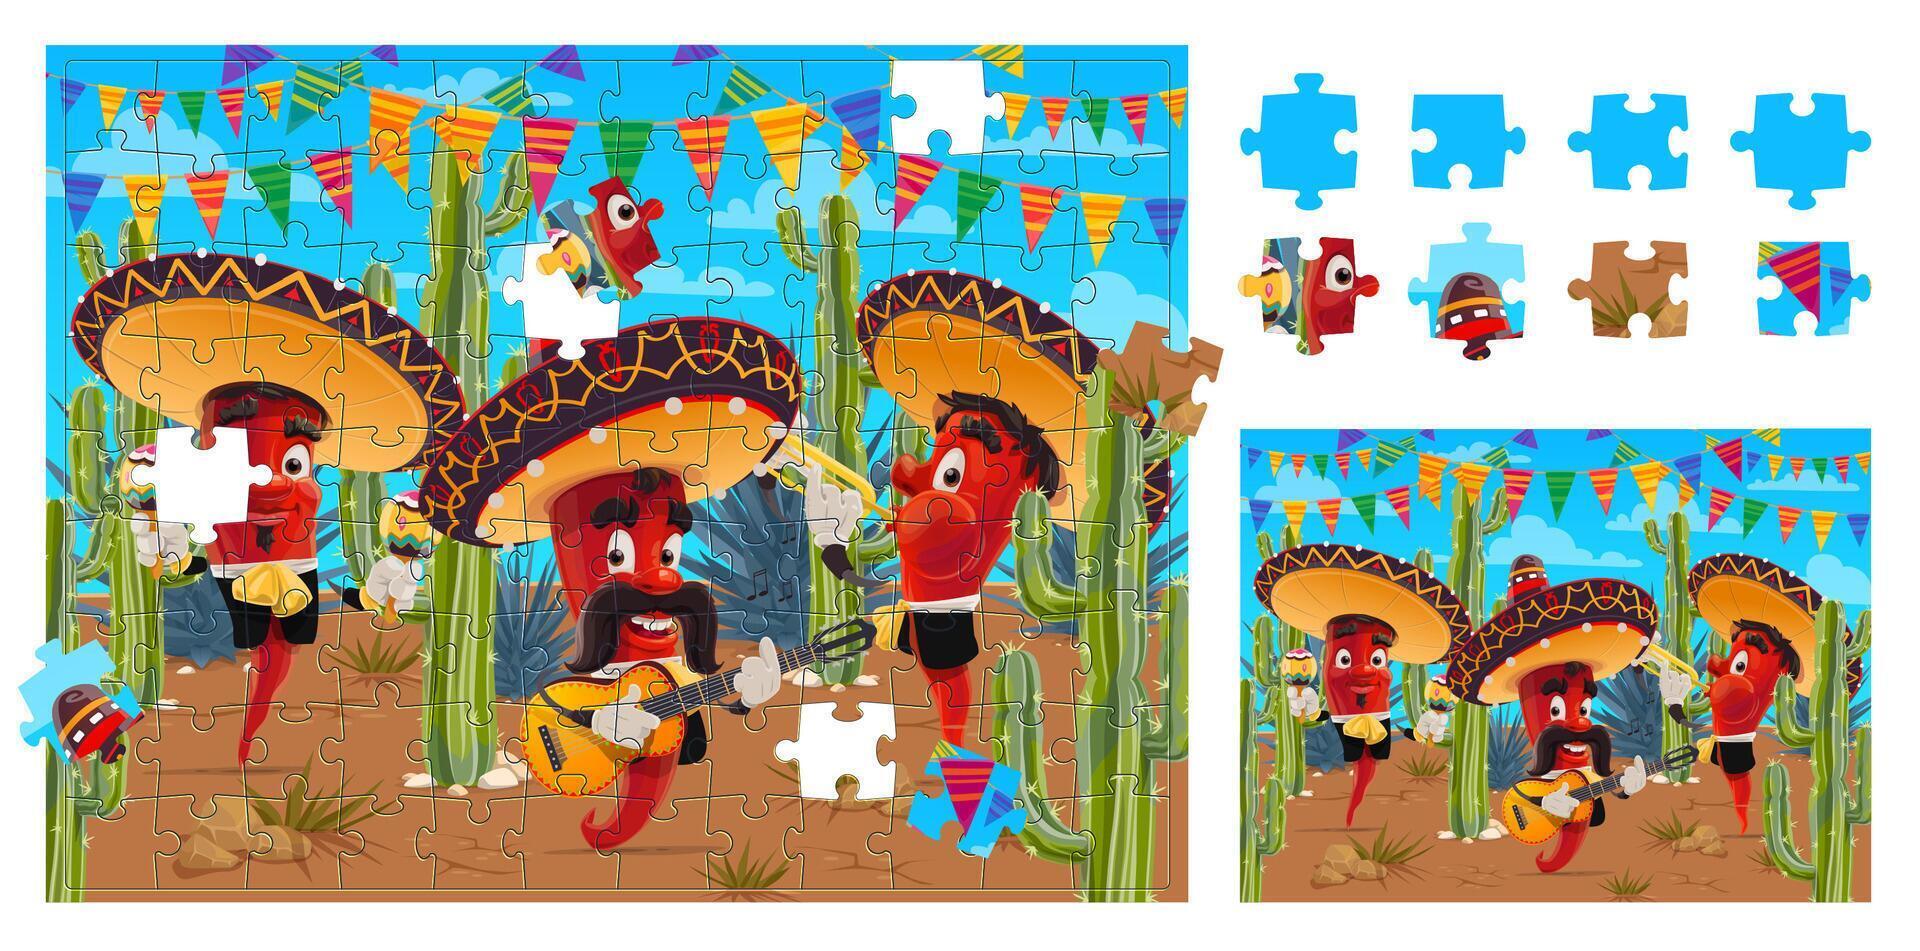 Jigsaw puzzle game with chili mariachi peppers vector